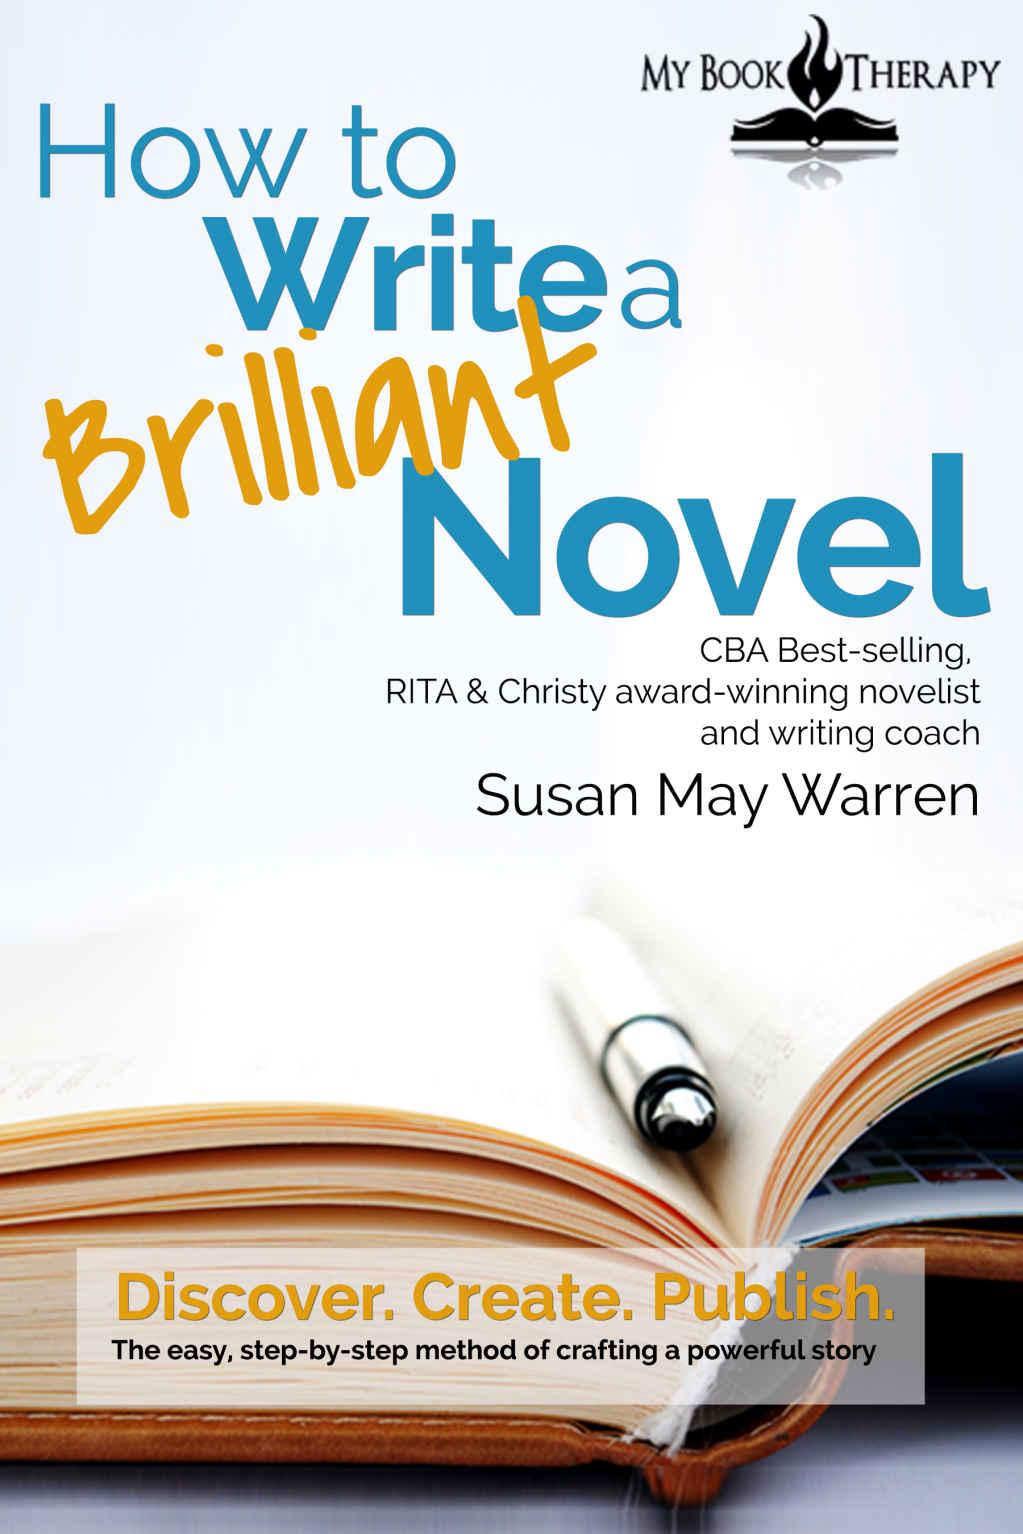 How to Write a Brilliant Novel: The Easy Step-By-Step Method of Crafting a Powerful Story (Go! Write Something Brilliant) by Susan May Warren